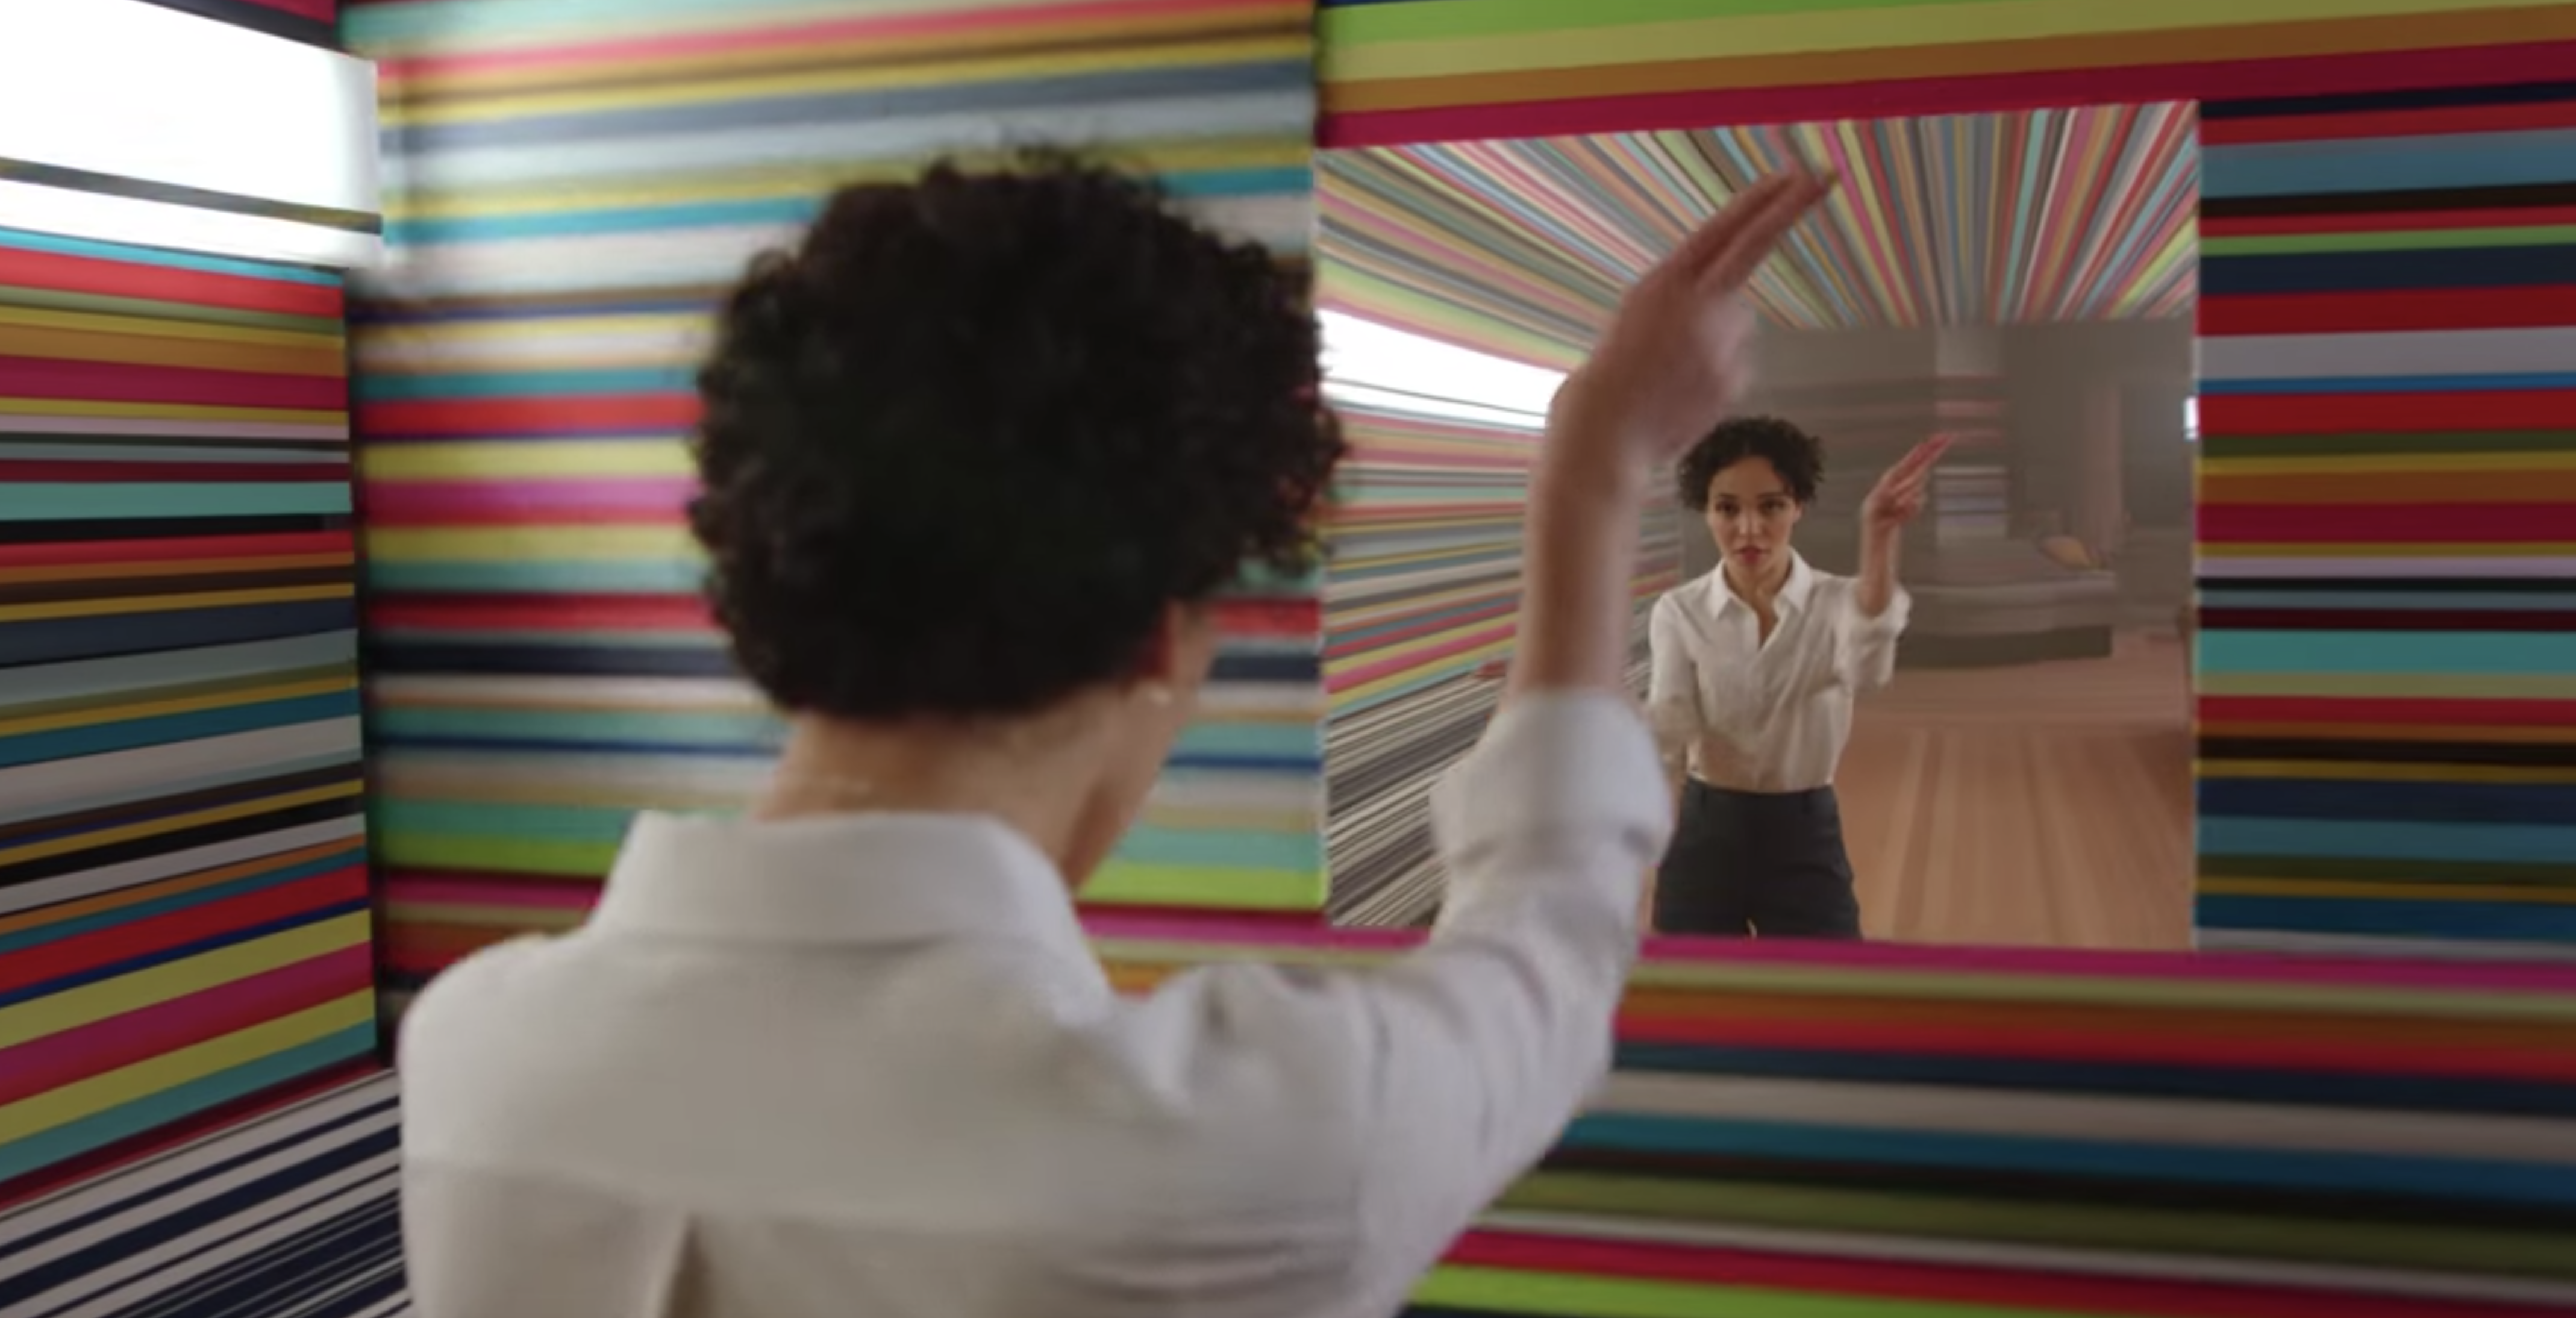 Watch The Mind-Bending HomePod Short Film Featuring FKA Twigs & A New Anderson .Paak Song